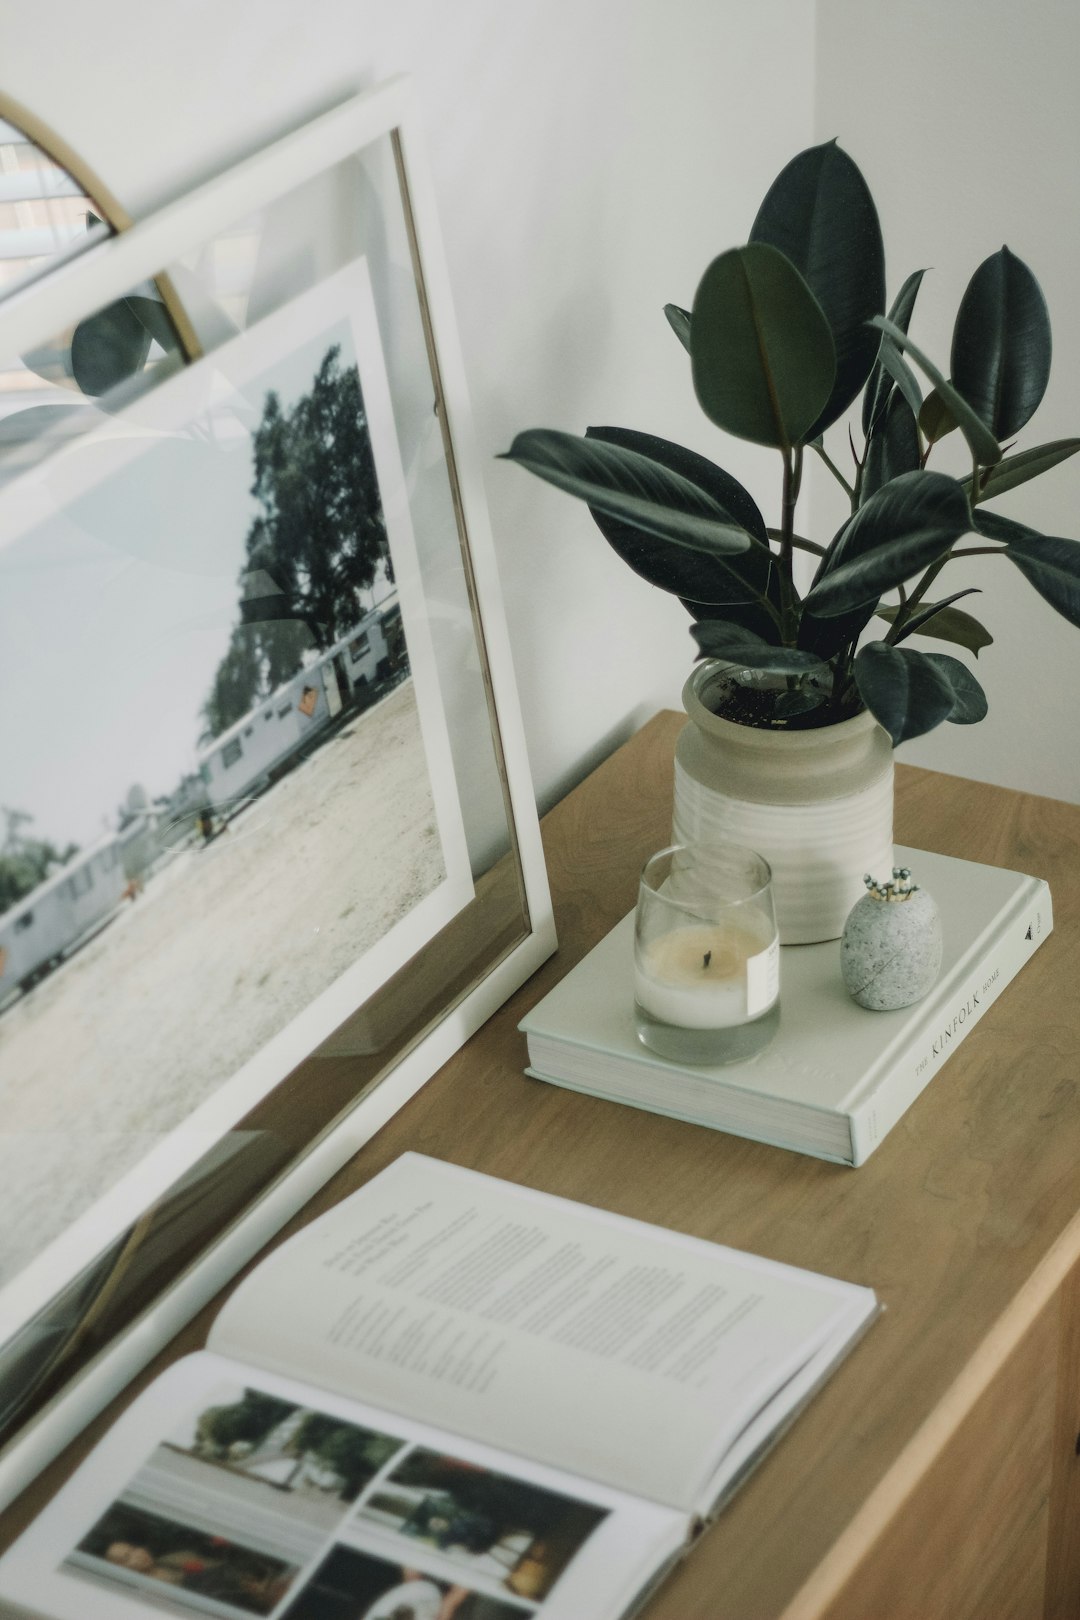 A close up photo of a book, magazine and framed photograph on the desk with white lighting, a small green plant in a vase, a scented candle, in the style of modern home decor, aesthetic, minimalist, neutral colours.